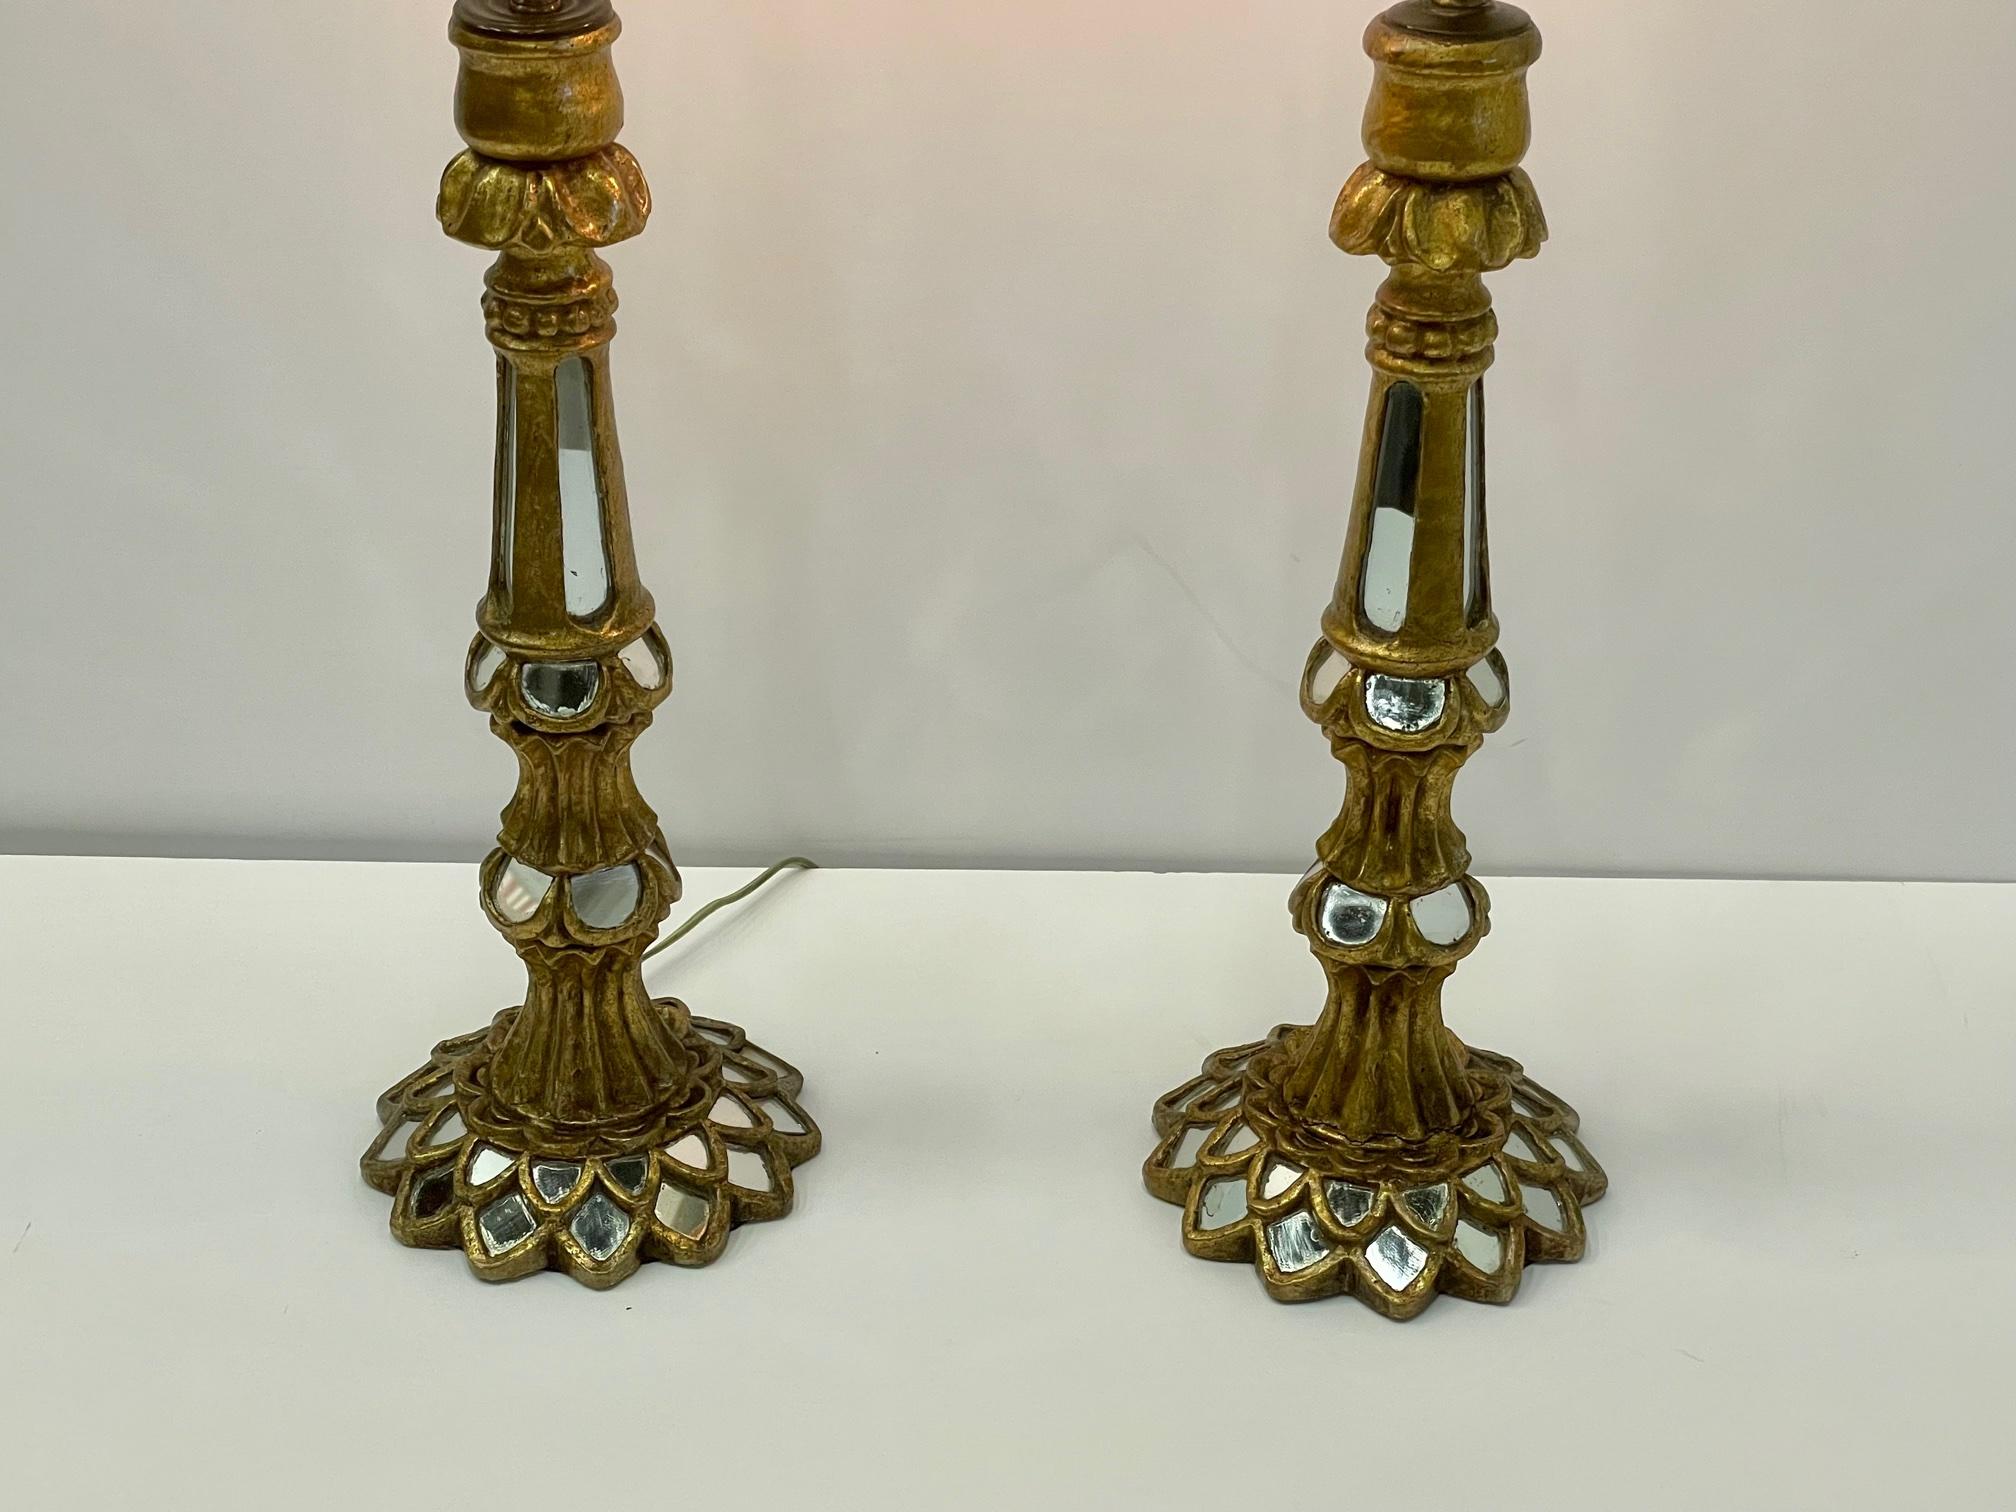 Beautiful Pair of Glistening Italian Giltwood Table Lamps with Inset Mirrors For Sale 1